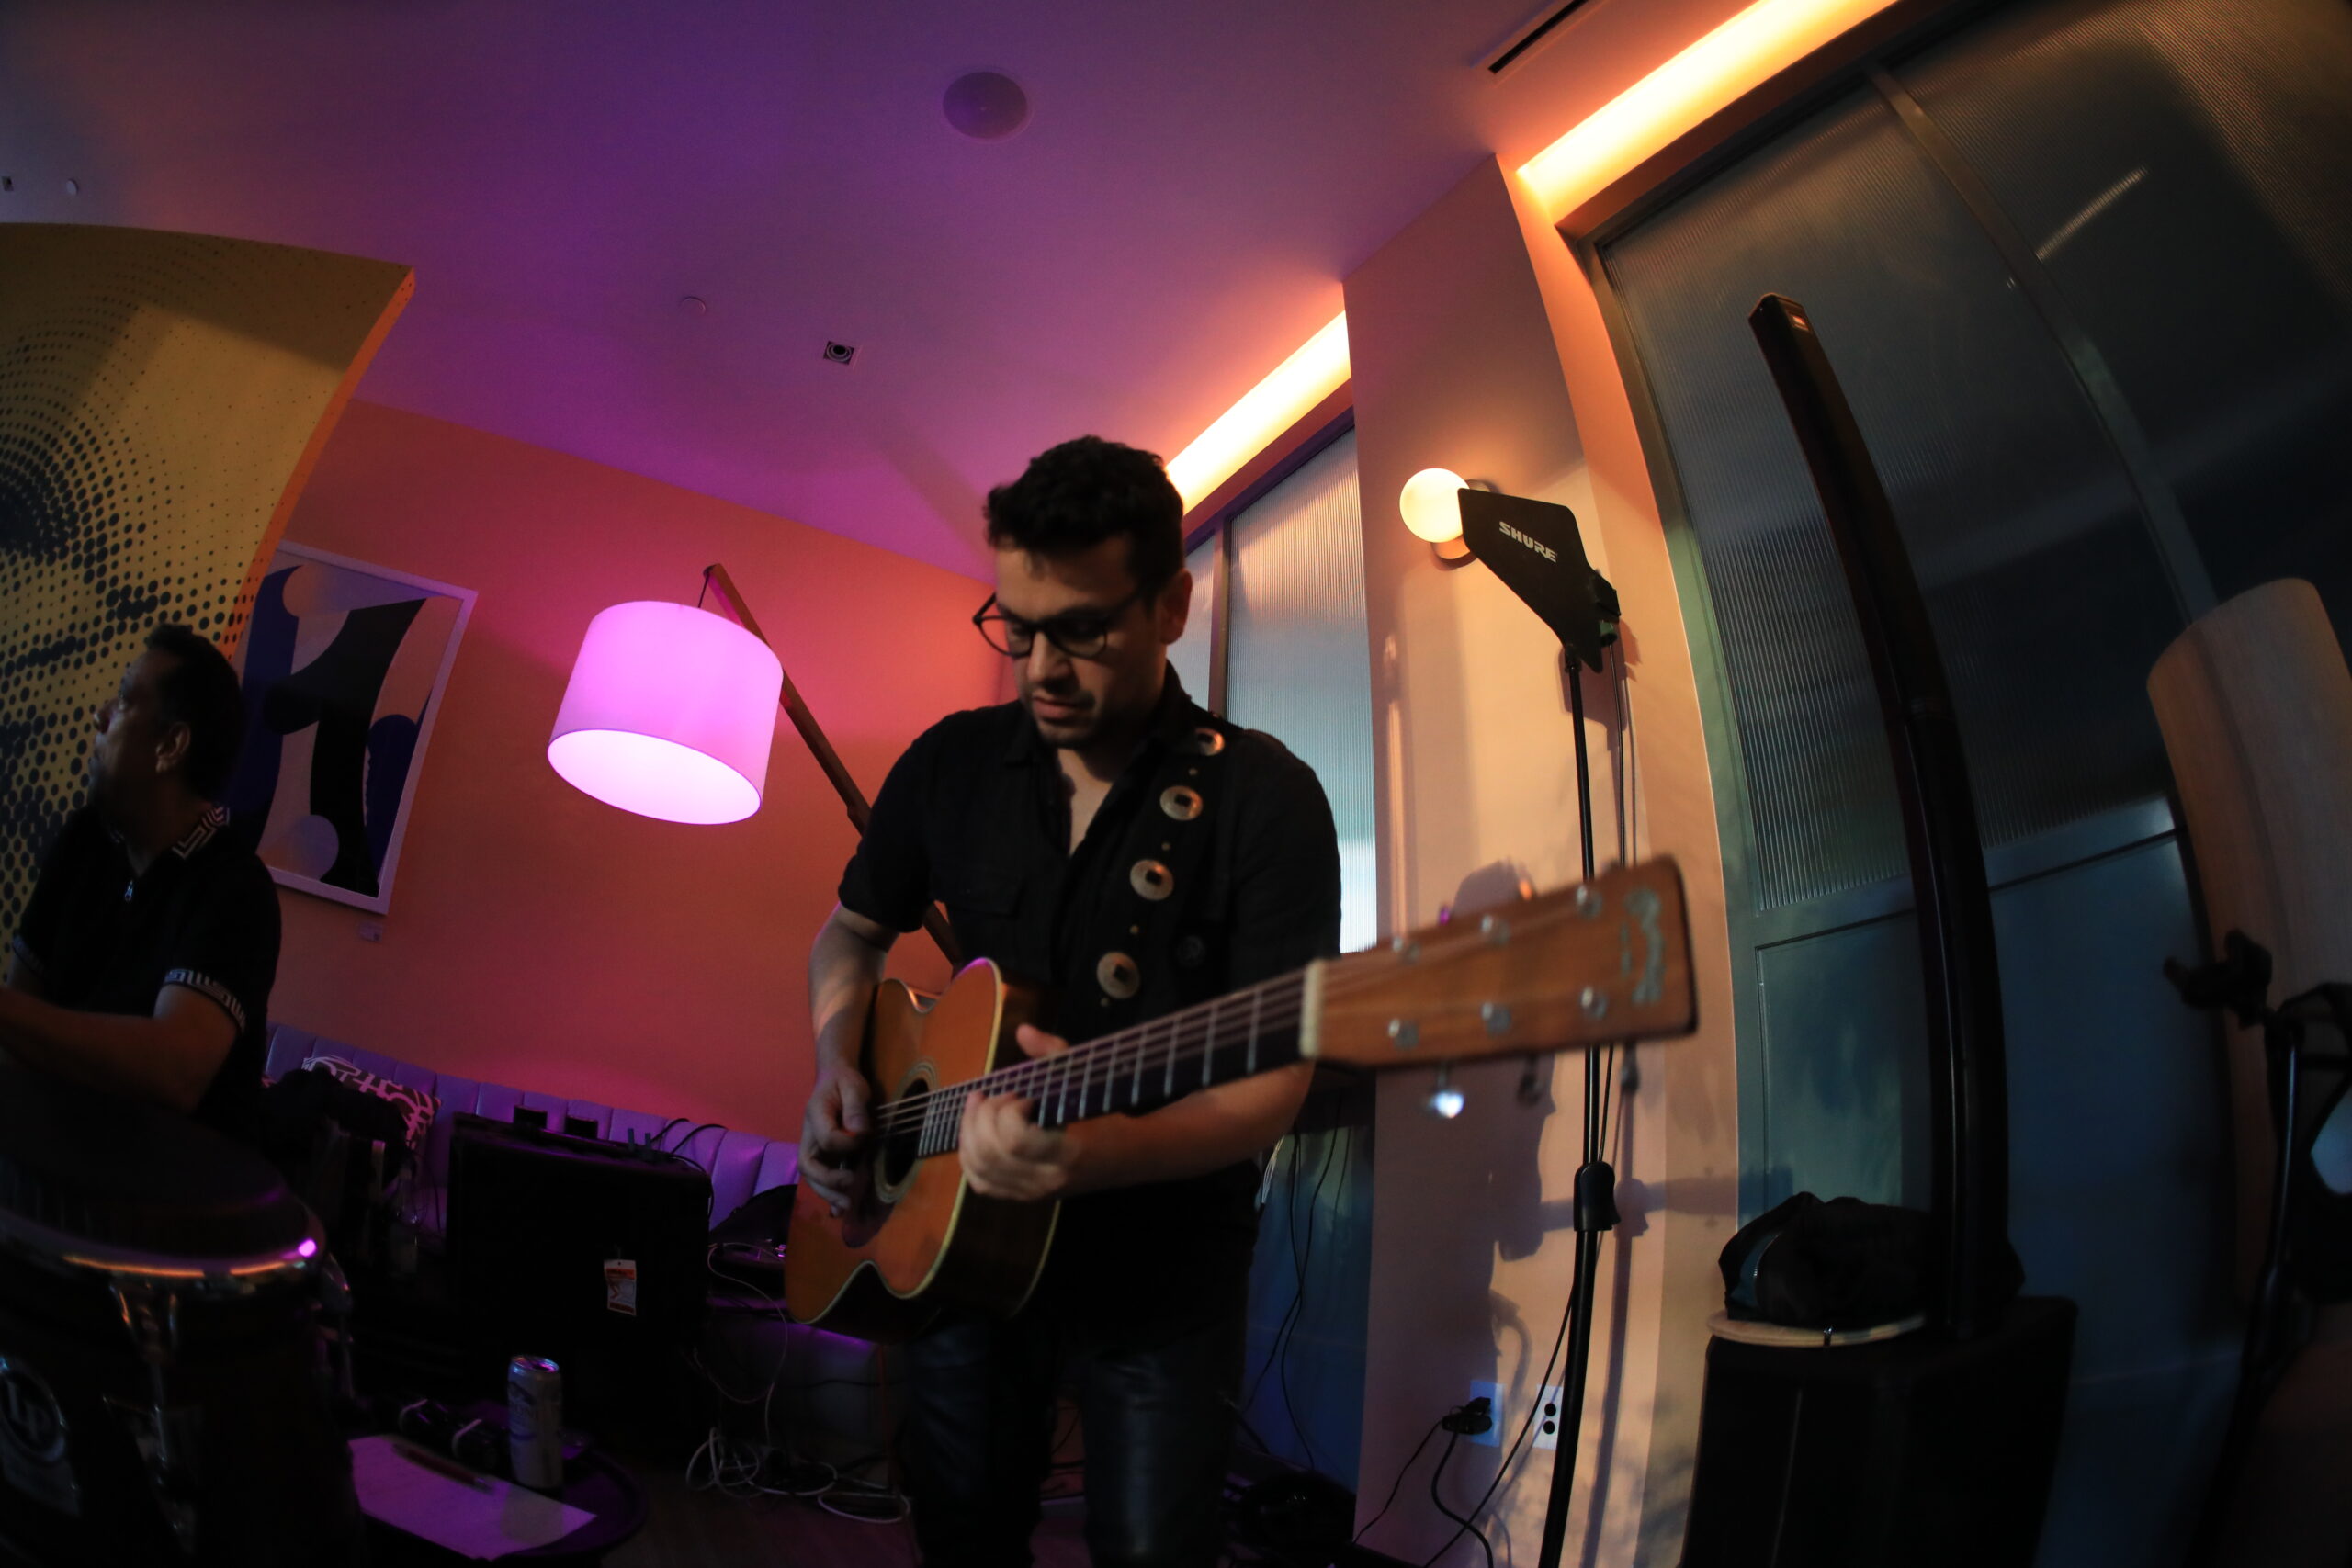 A man wearing dark glasses and clothes plays an acoustic guitar in a dimly lit room with pink and orange lighting.